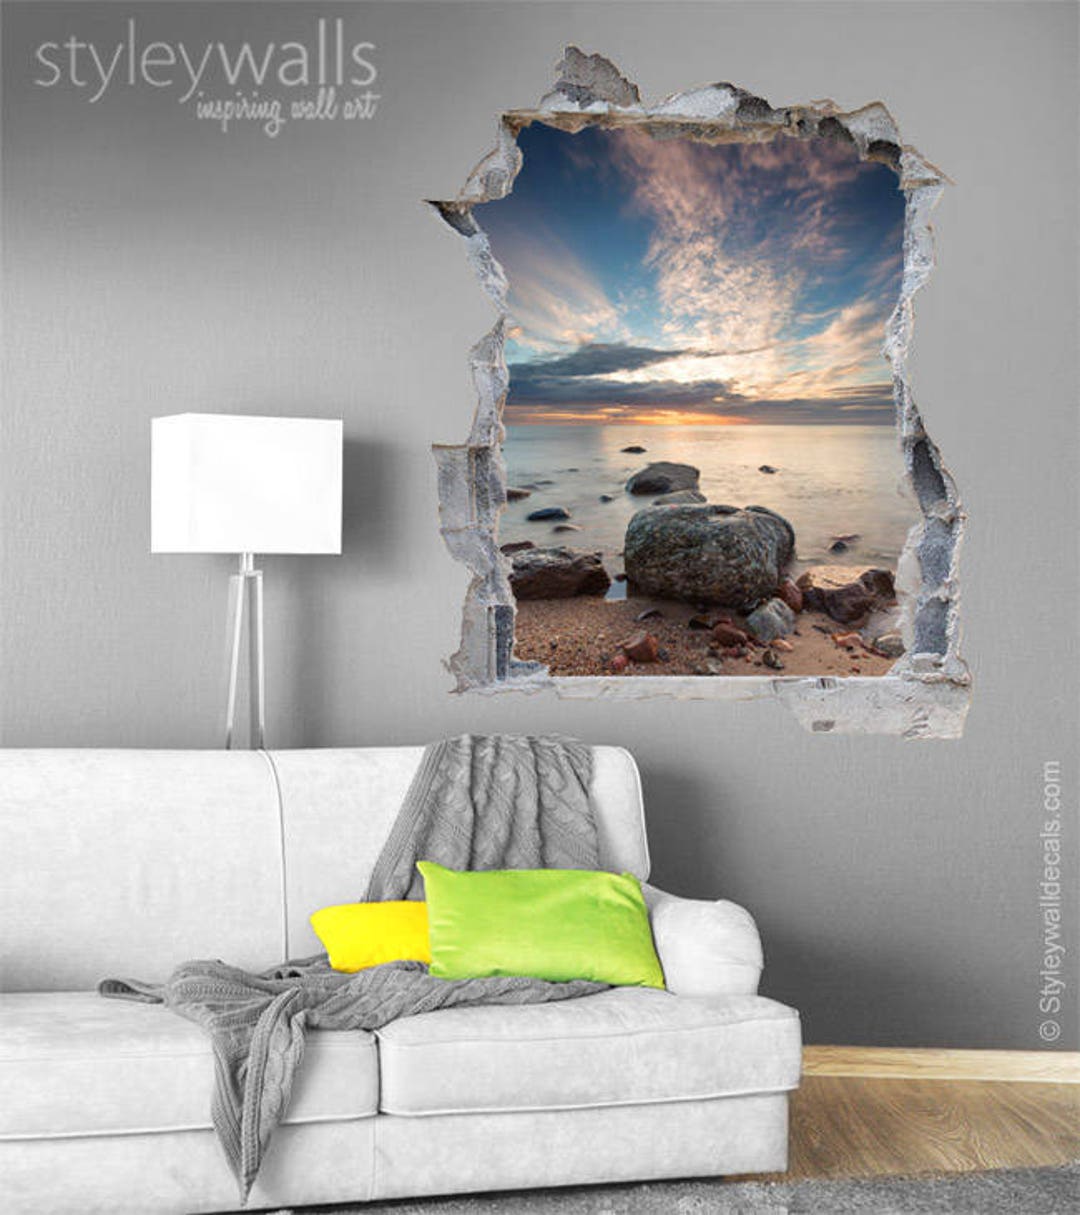 Hole in the Wall 3d Effect Wall Sticker, Sea View Wall Decal, Rocks Wall  Decor Mural, 3d Wall Decal, 3d Effect Office Living Room Decor -  Israel